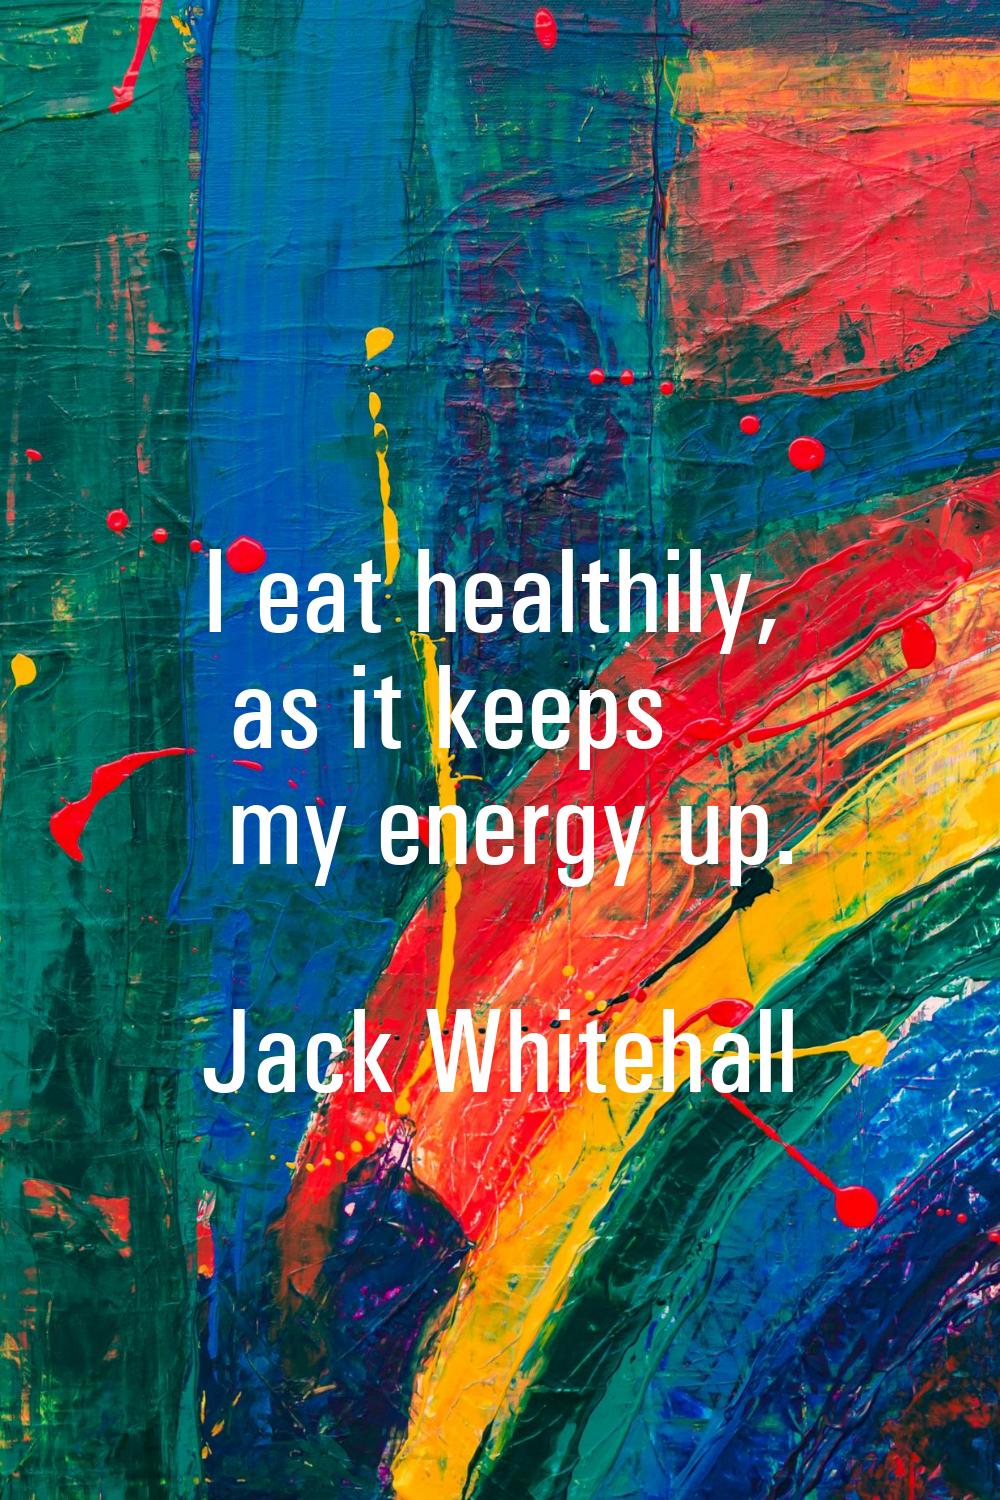 I eat healthily, as it keeps my energy up.